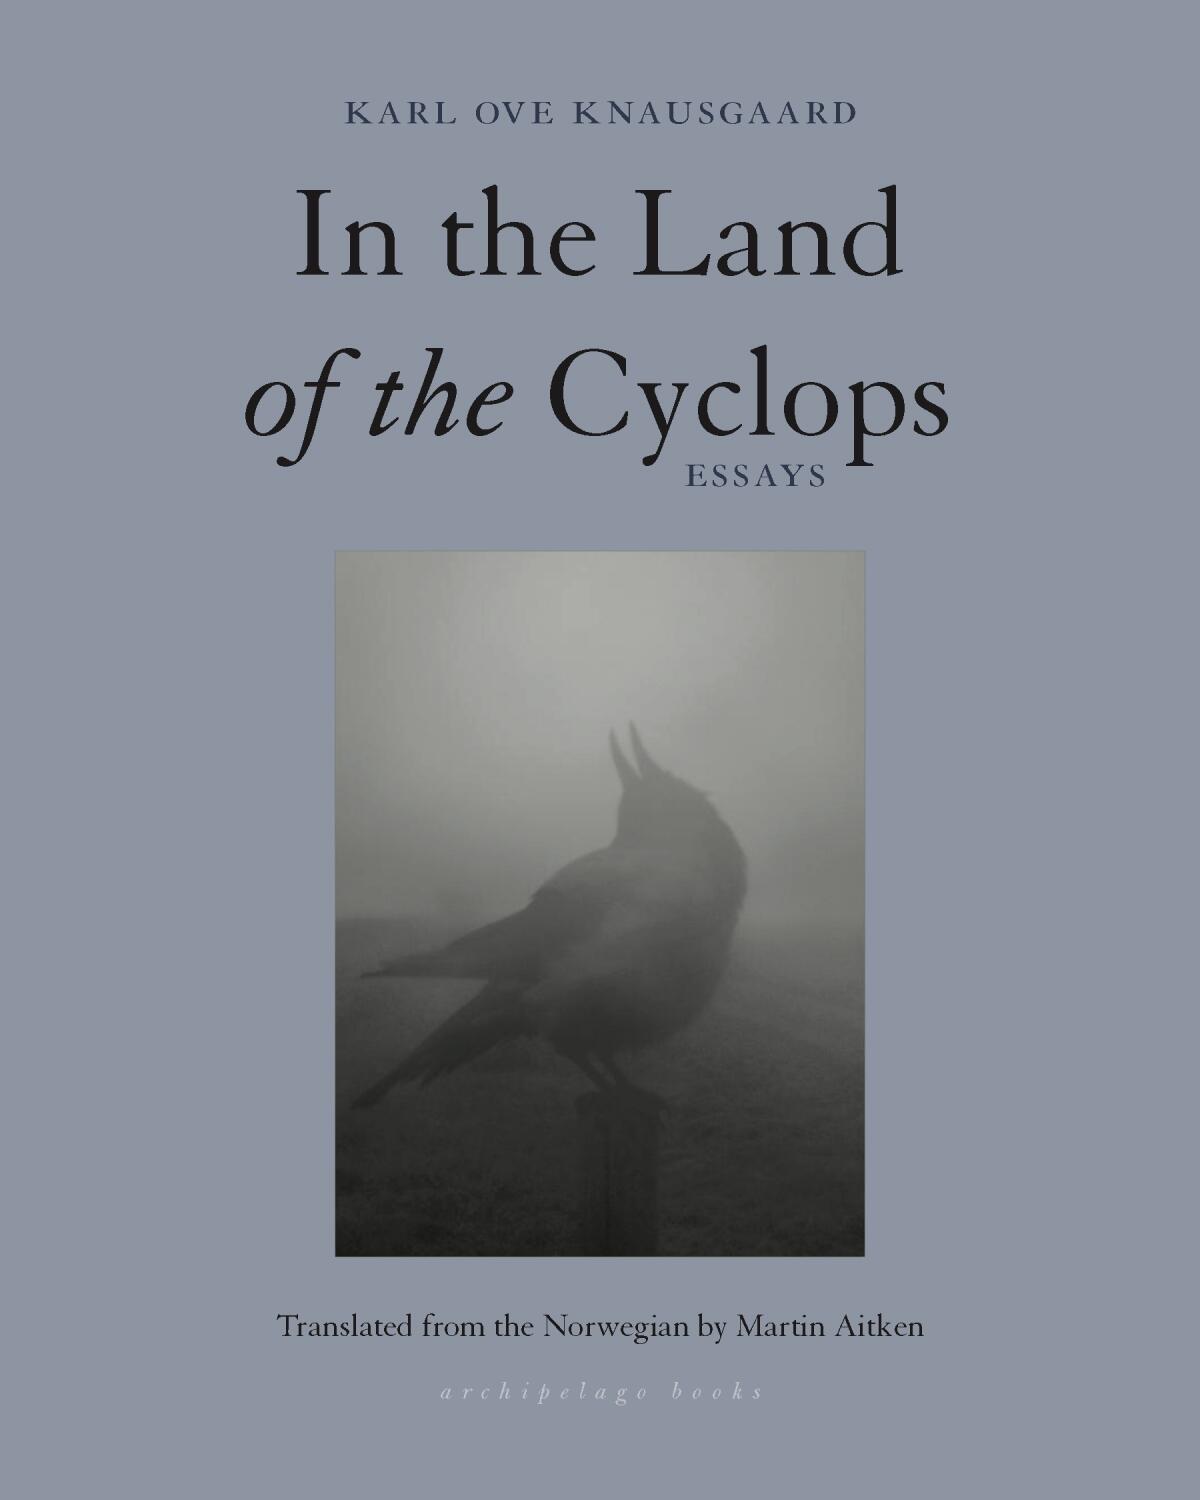 Cover of "In the Land of the Cyclops," by Karl Ove Knausgaard.